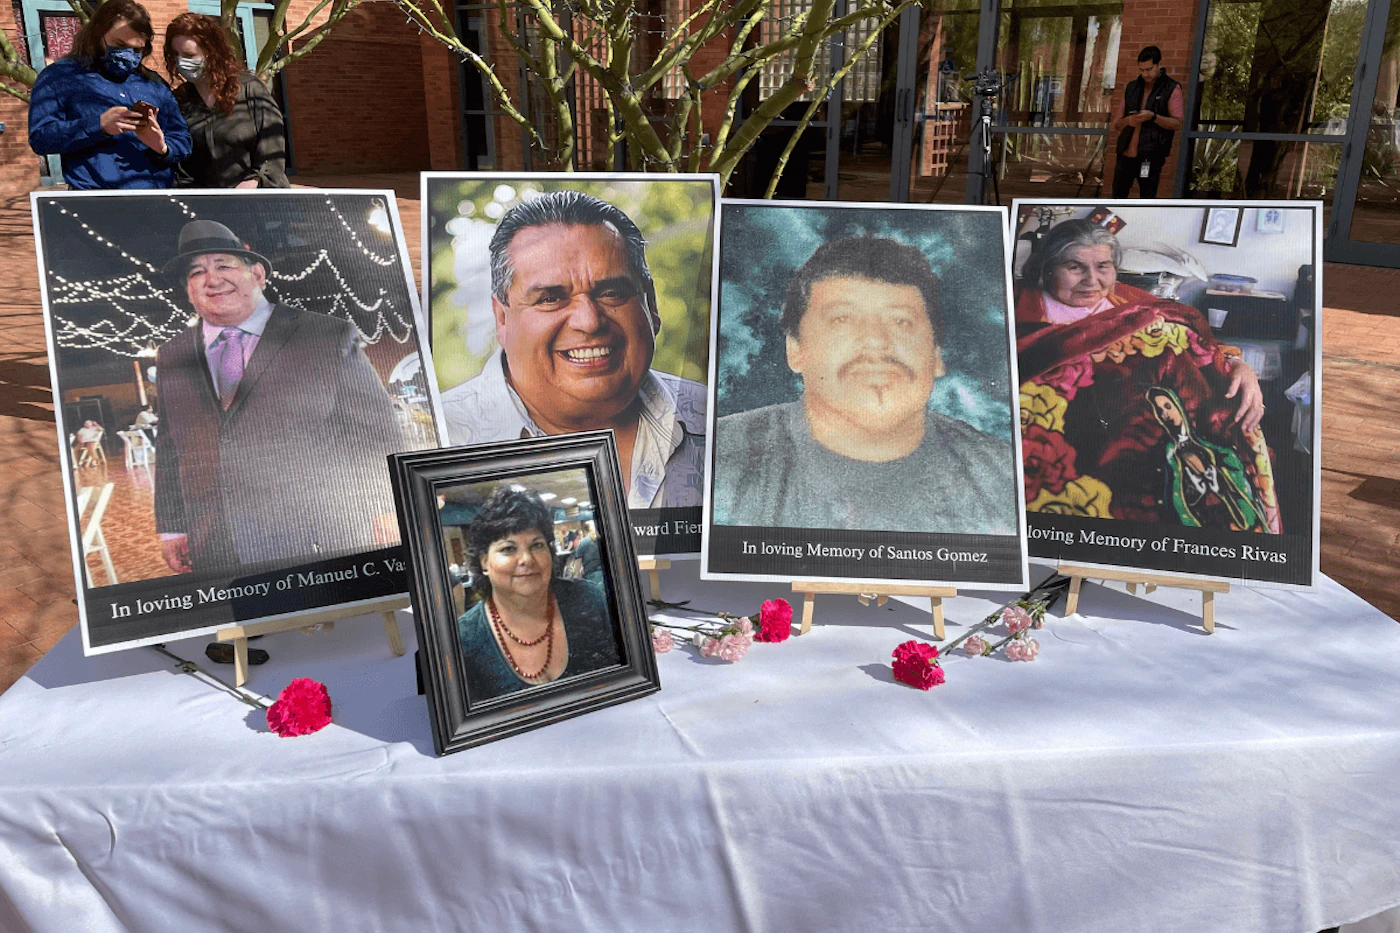 framed photos of people lost to COVID set up on a table with flowers